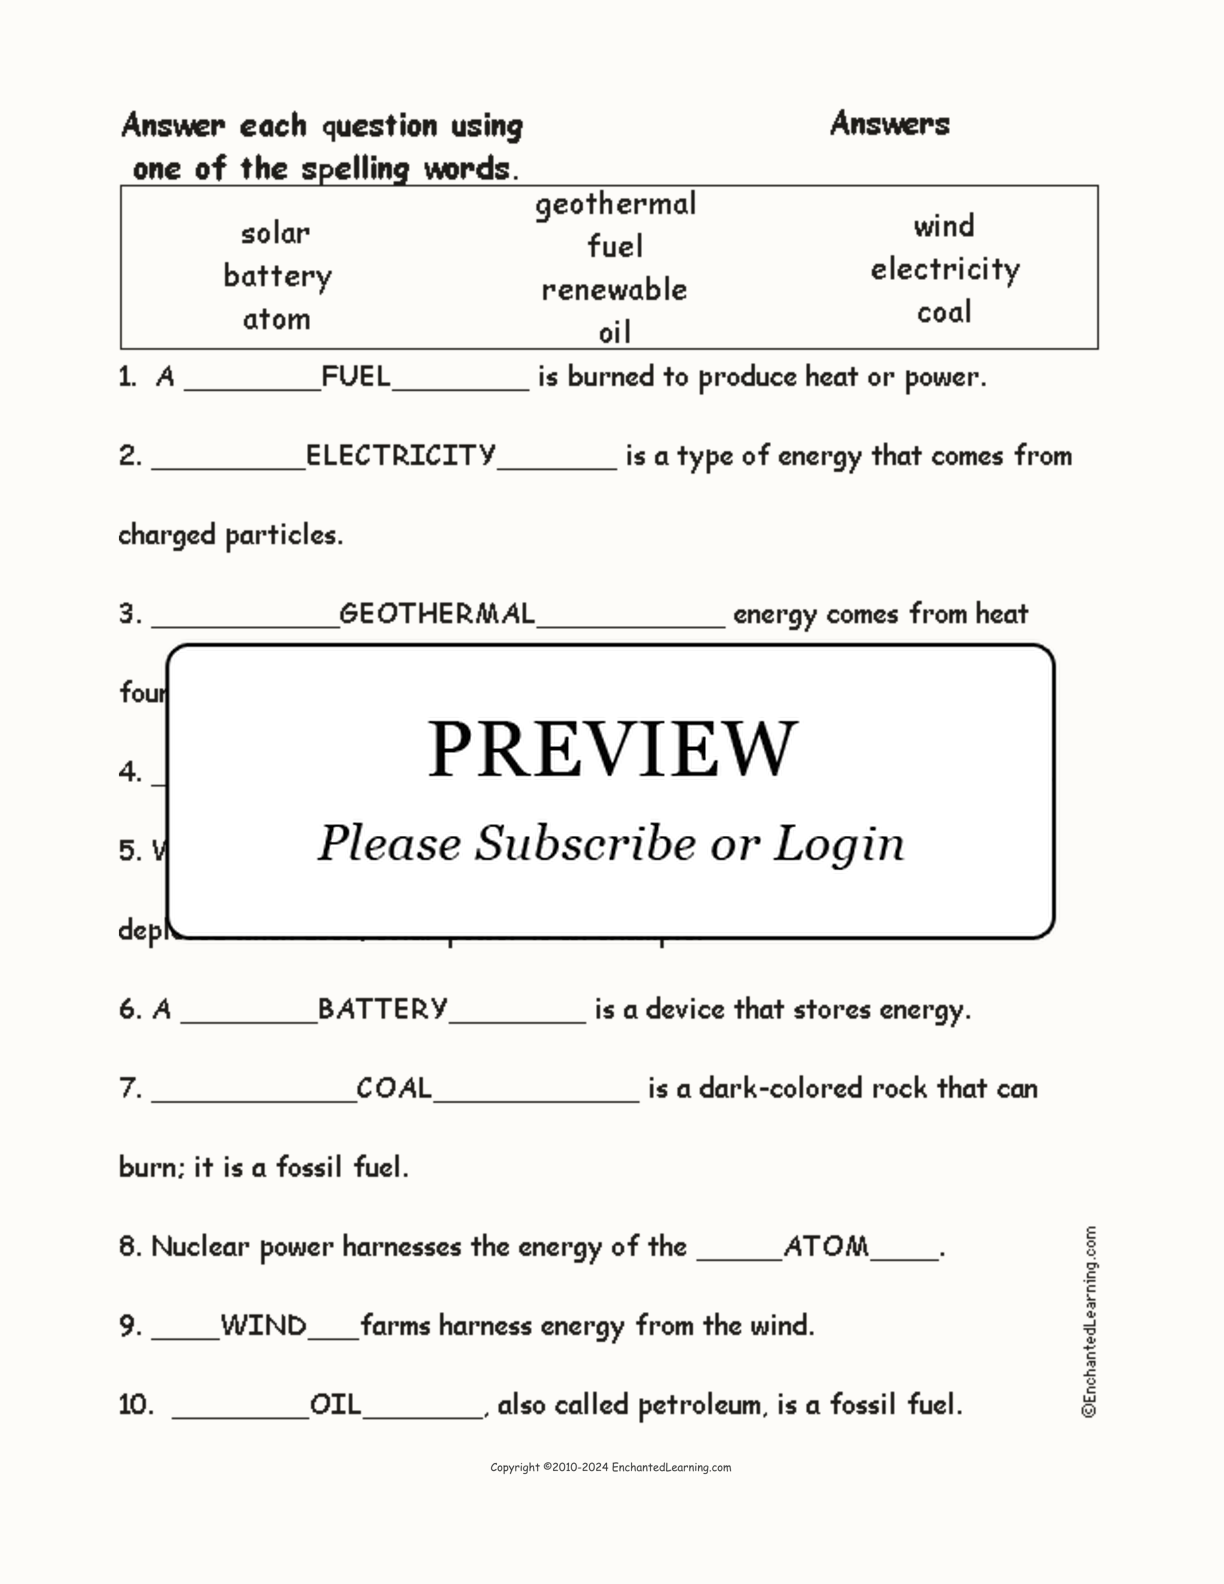 Energy Spelling Word Questions interactive worksheet page 2